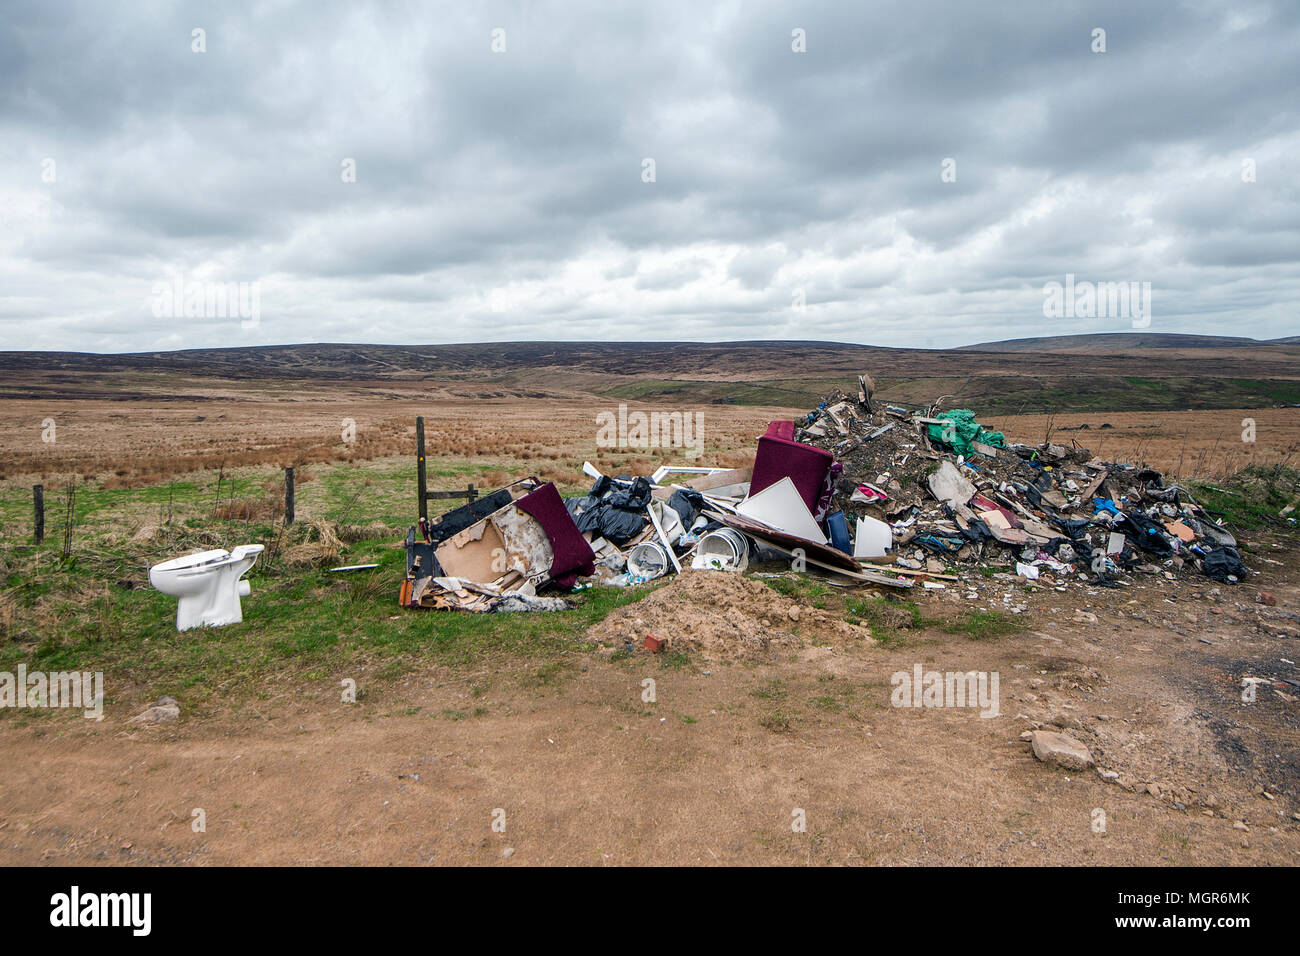 household rubbish discarded on a remote moorland location Stock Photo